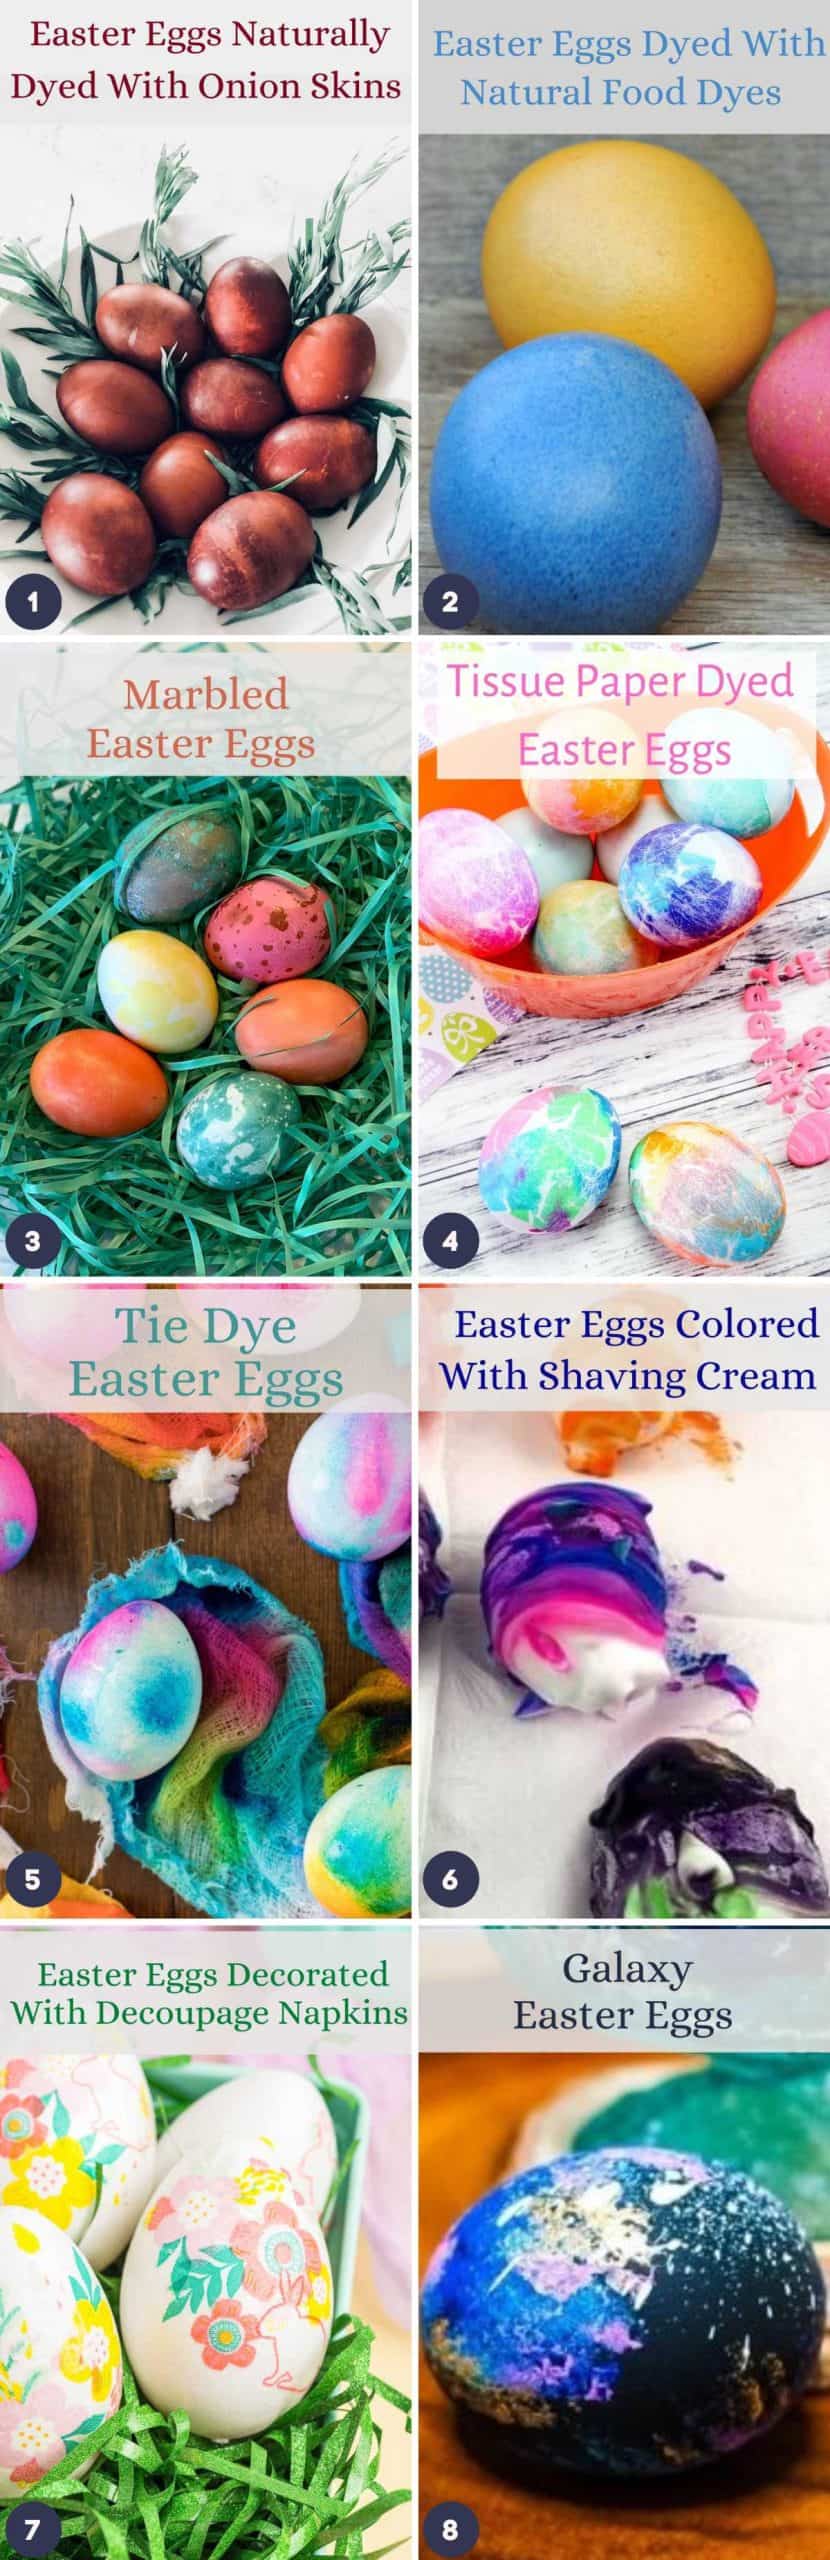 A list of 8 different Easter egg designs for kids